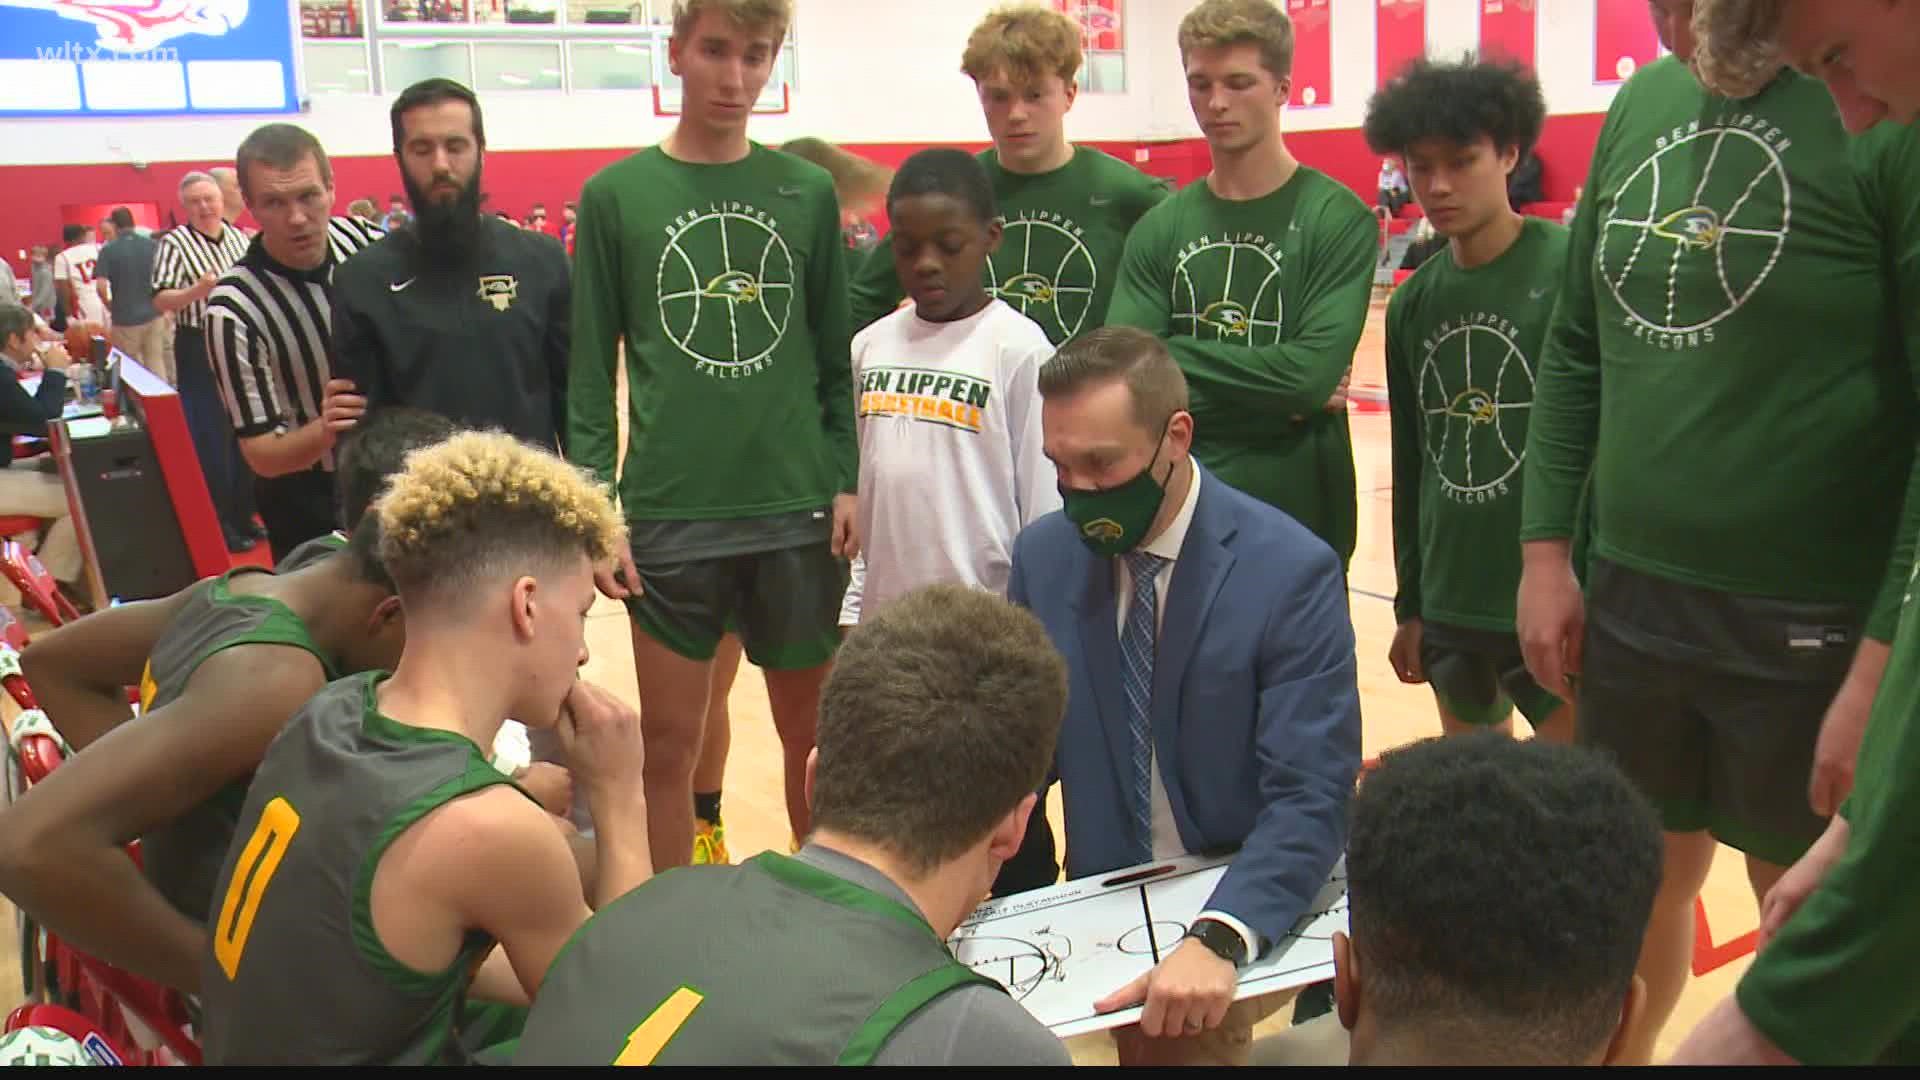 Highlights from games at Spring Valley High School and Hammond School.